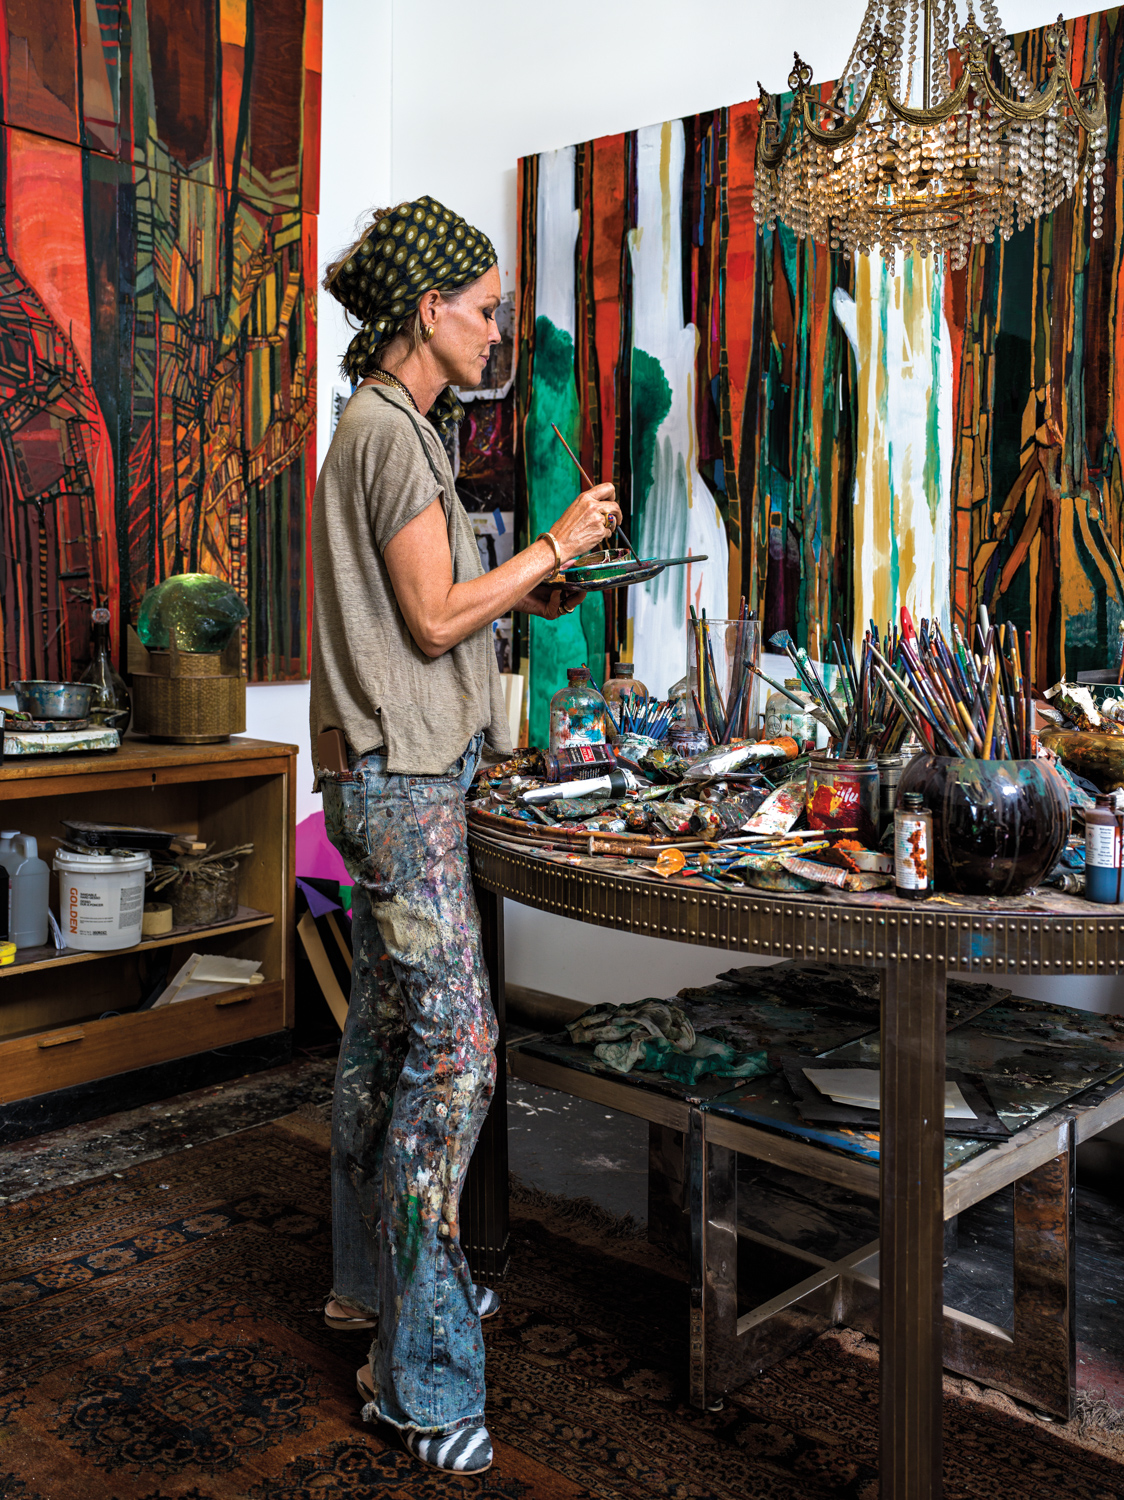 woman with headscarf standing in art studio mixing paint over a table strewn with paint brushes and paint, with canvases in the background and a glass bead chandelier hung overhead